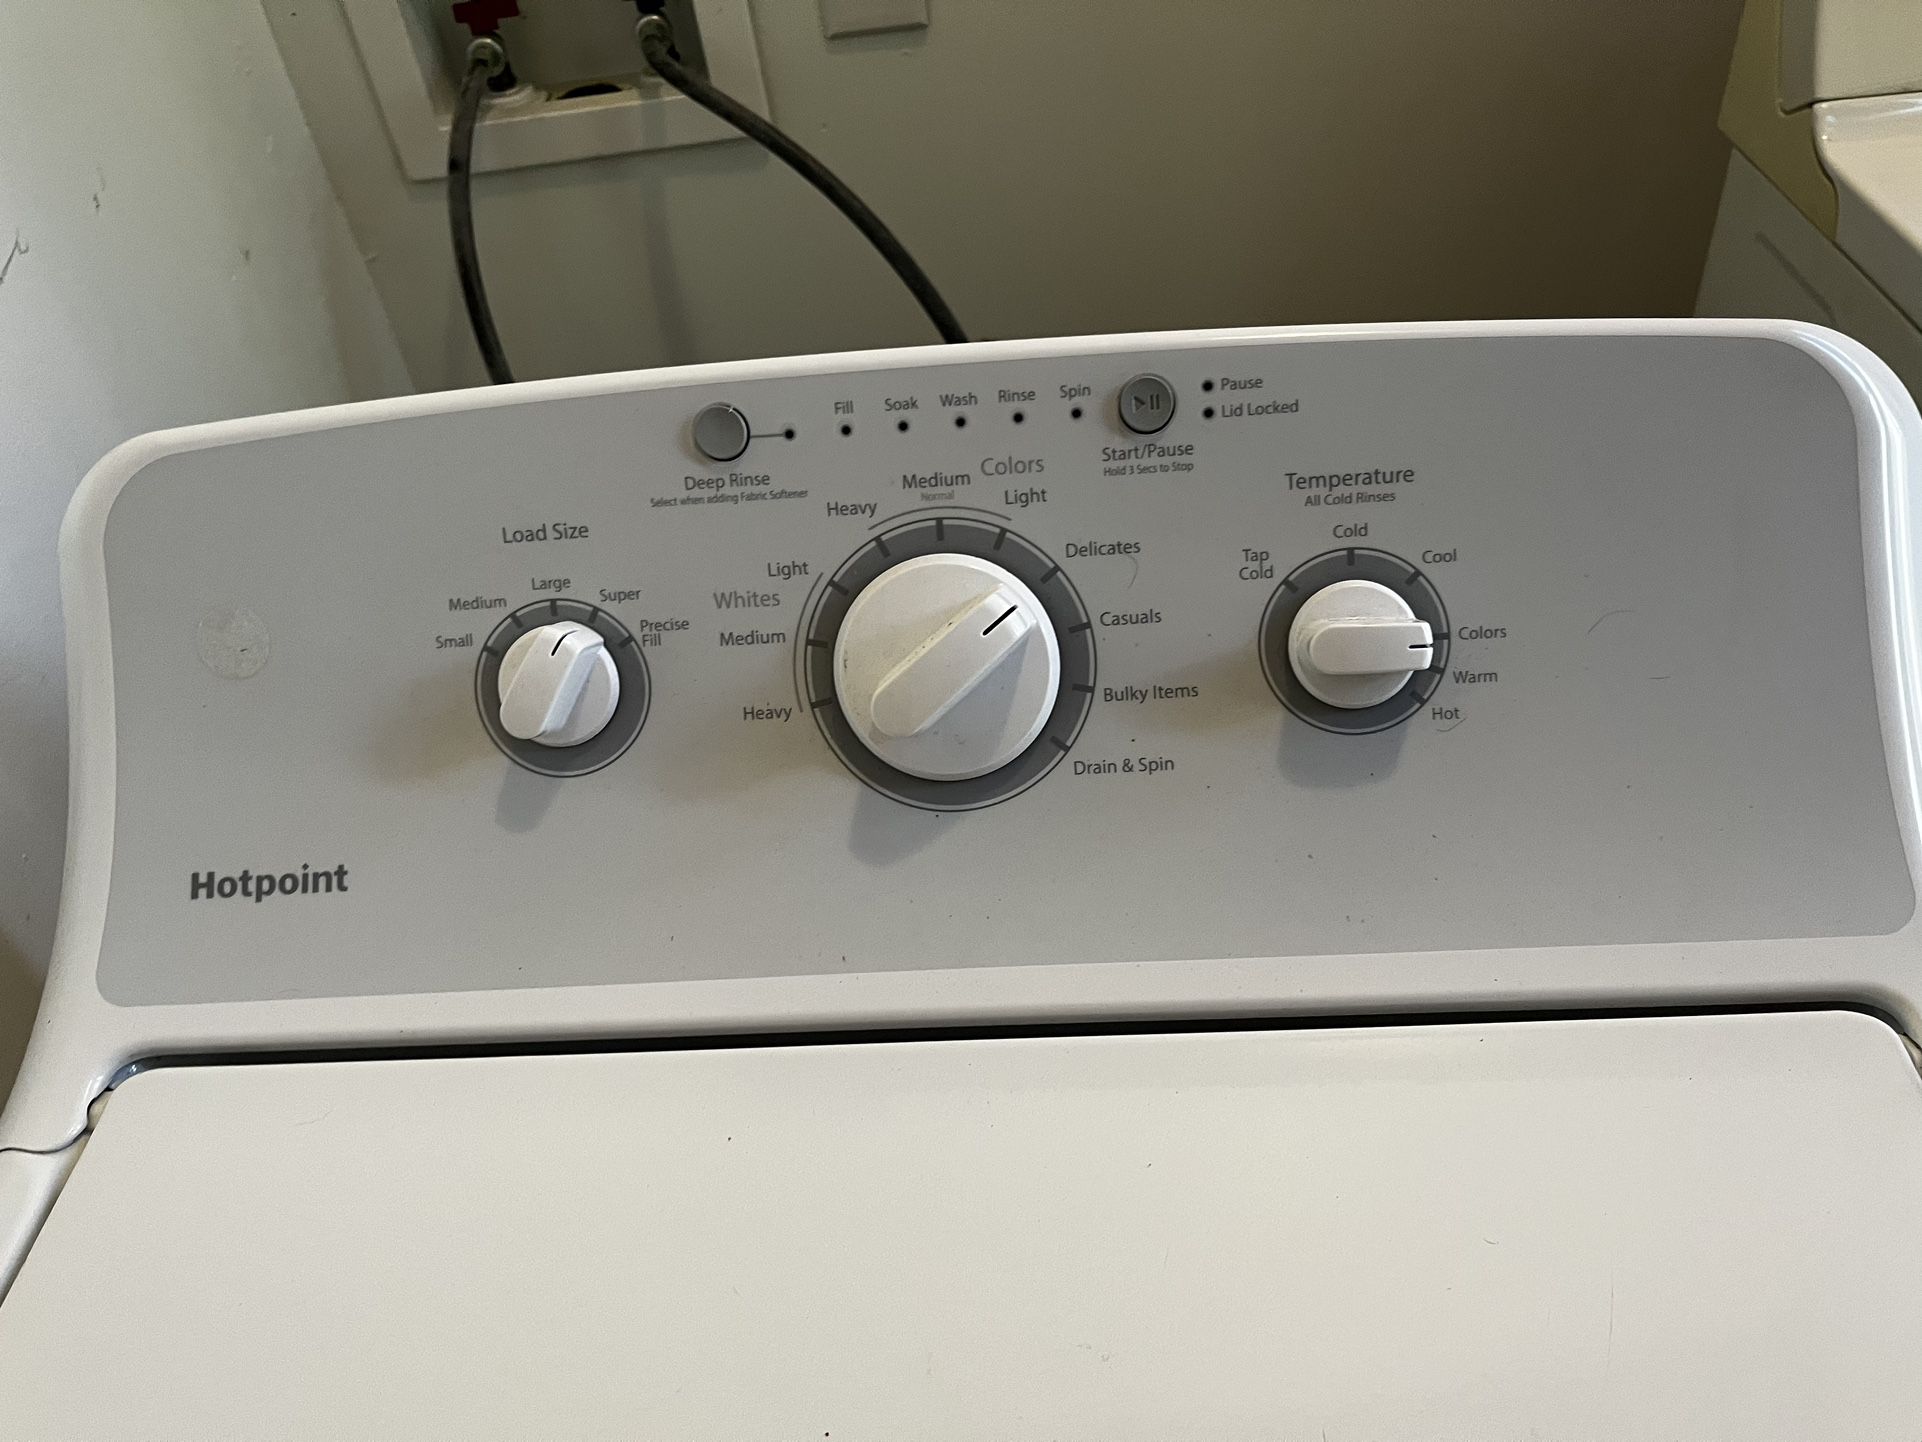 Hot point Washer And Dryer 